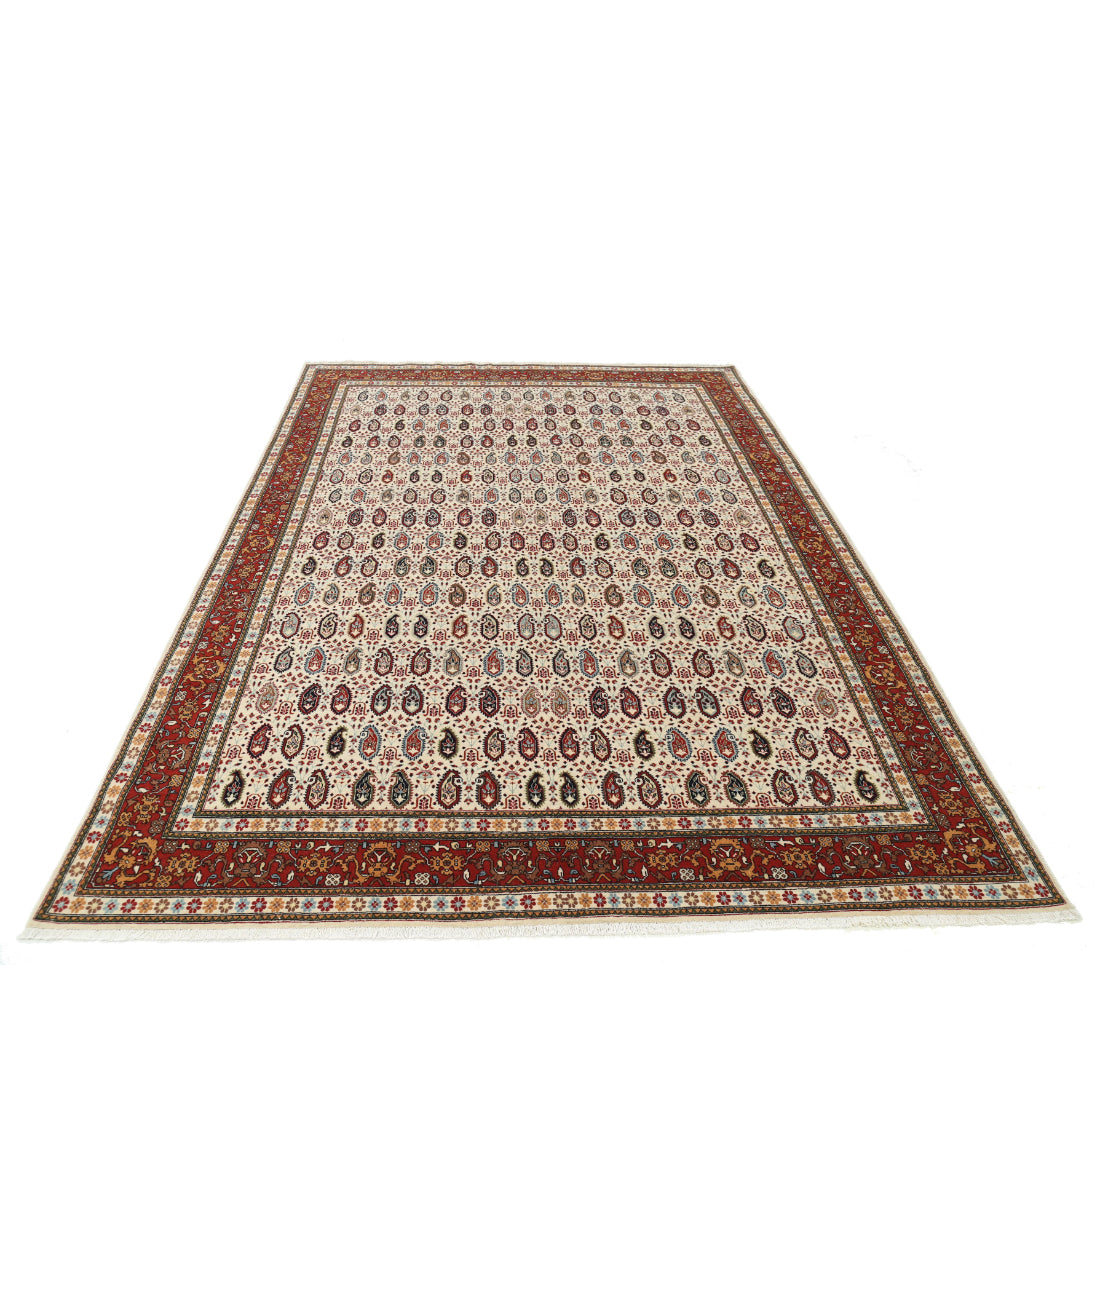 Hand Knotted Persian Tabriz Wool Rug - 6'5'' x 9'5'' 6'5'' x 9'5'' (193 X 283) / Ivory / Red